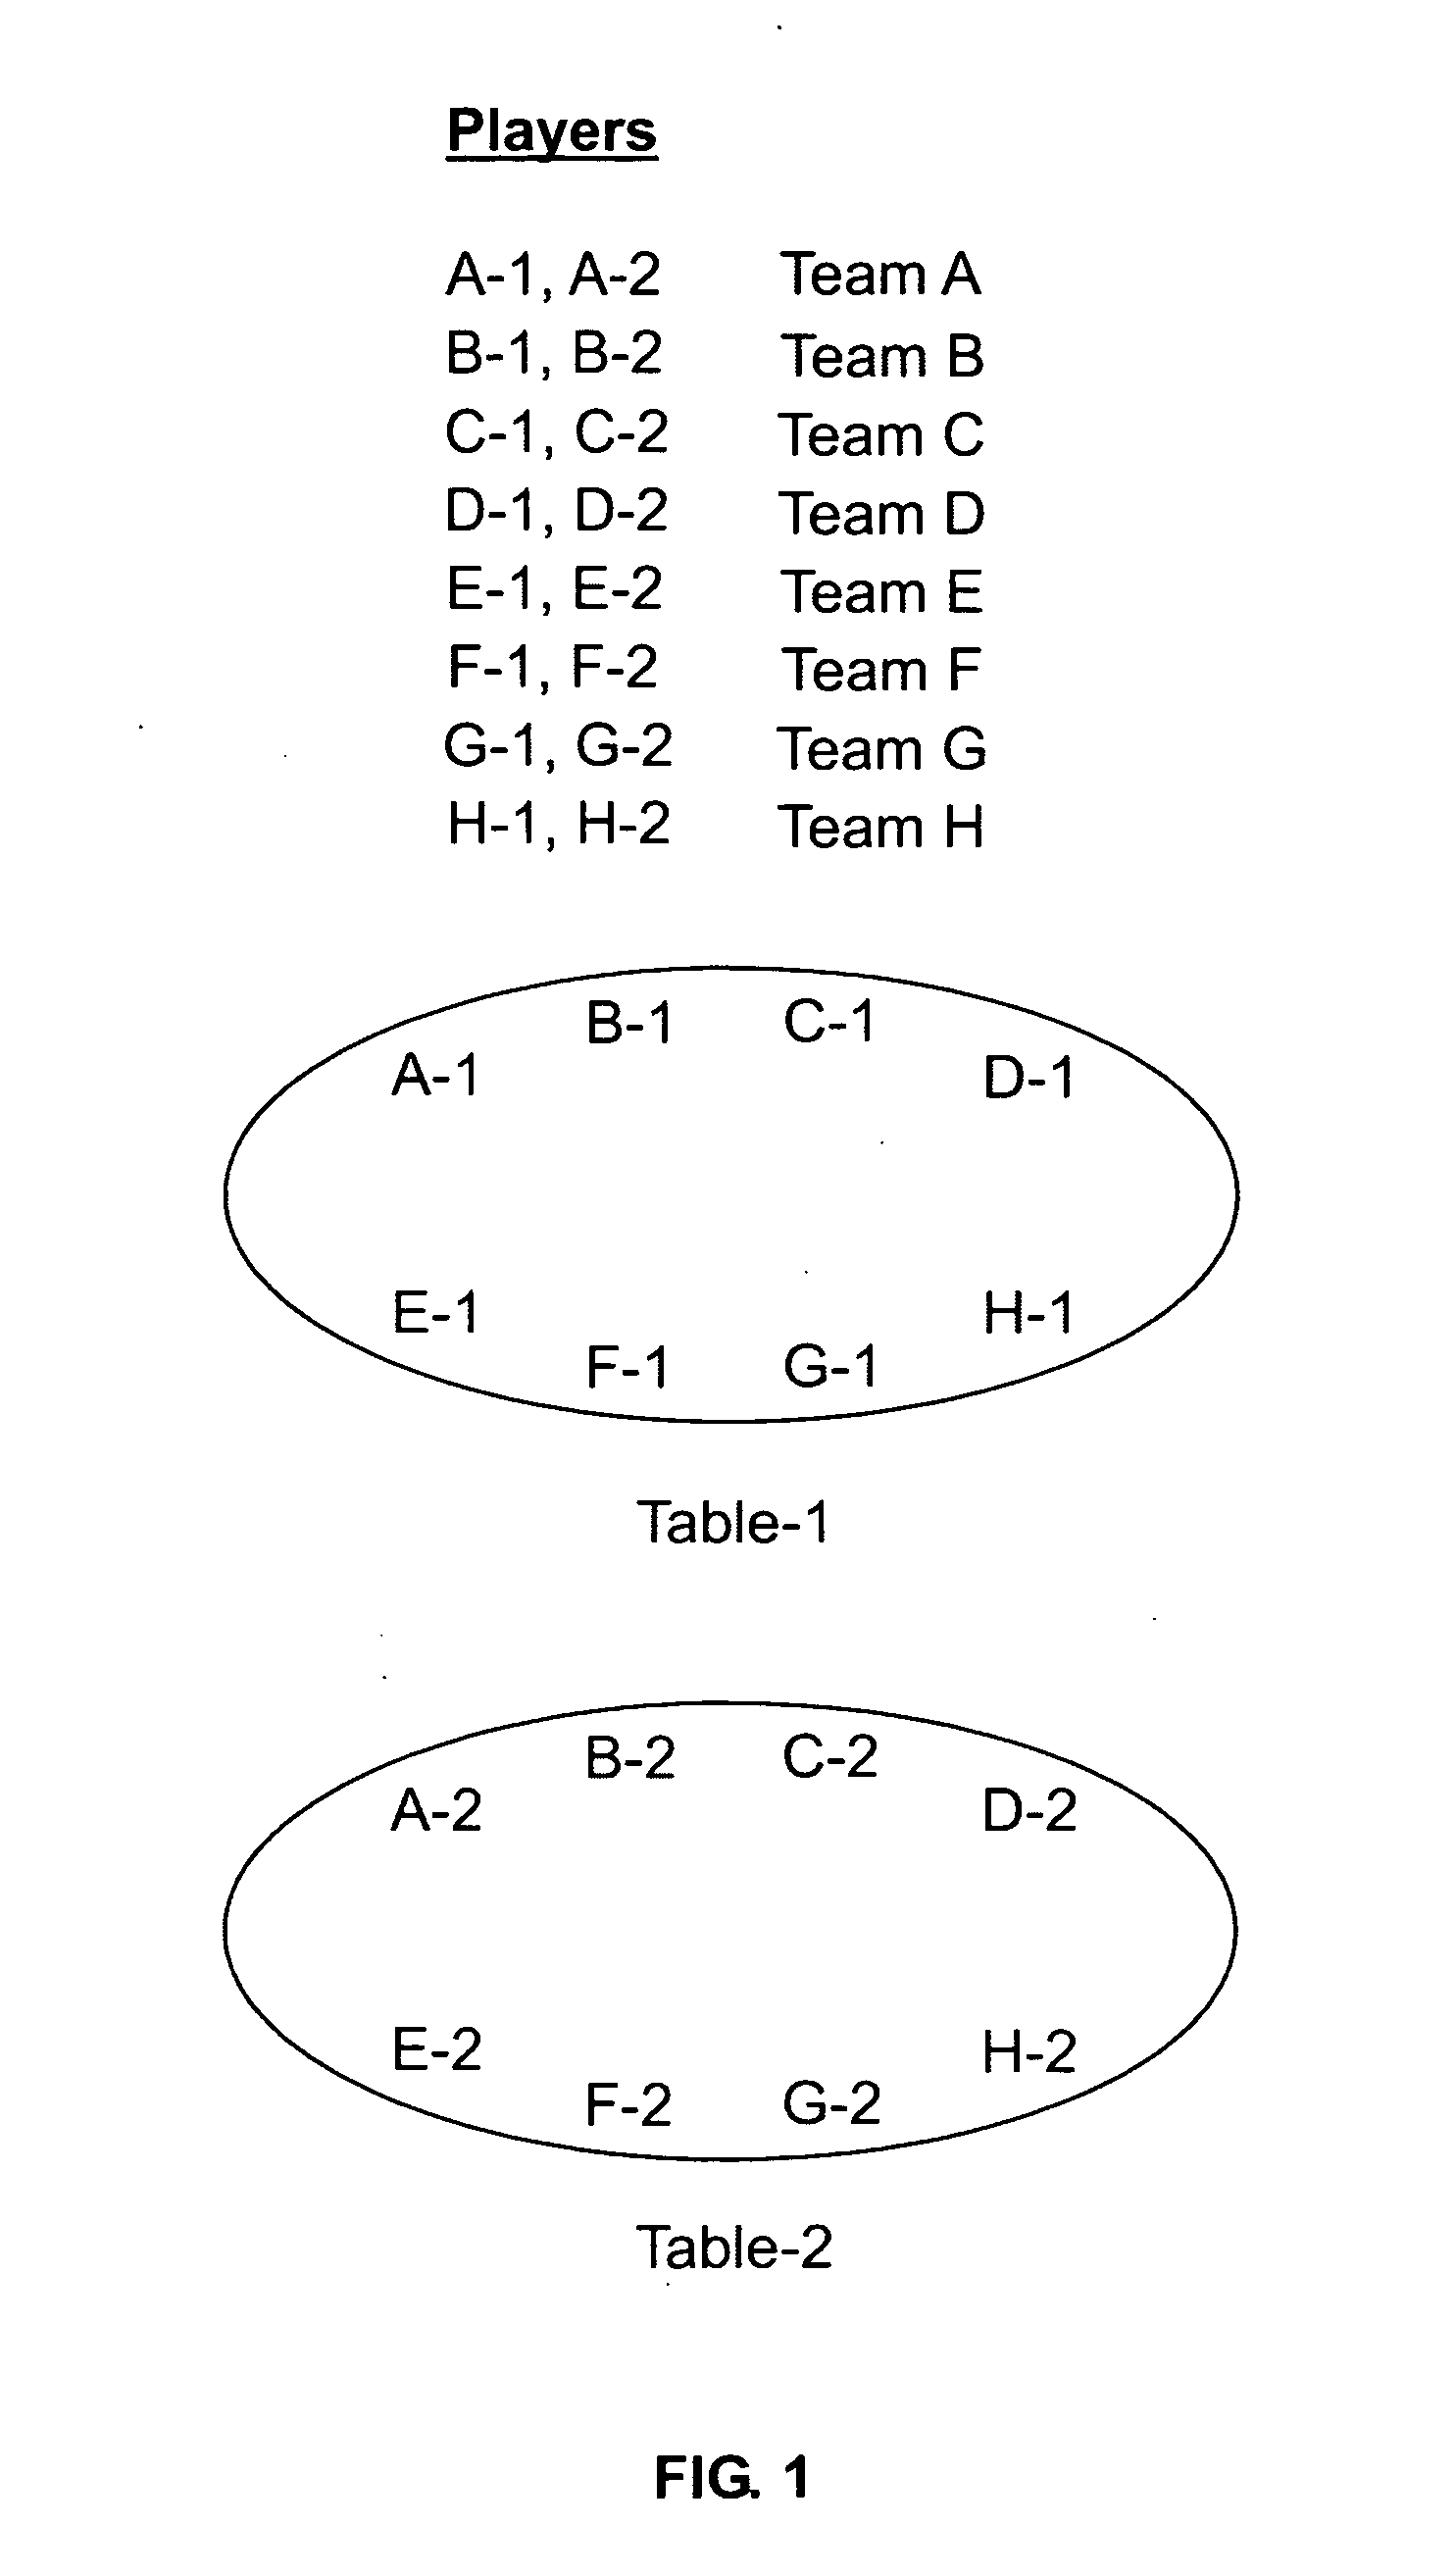 System and method of playing a multi-game card tournament